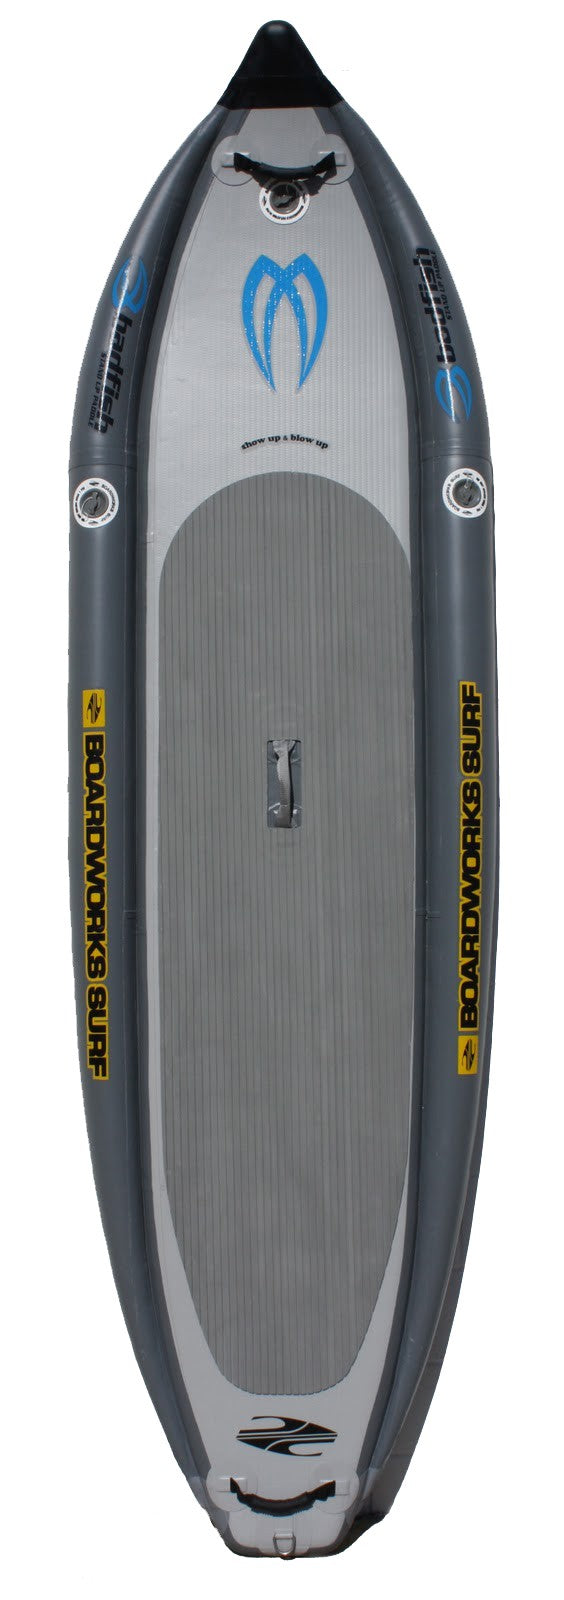 BOARDWORKS - Stand Up Paddle Hinchable - Badfish MCIT 9' - Gris